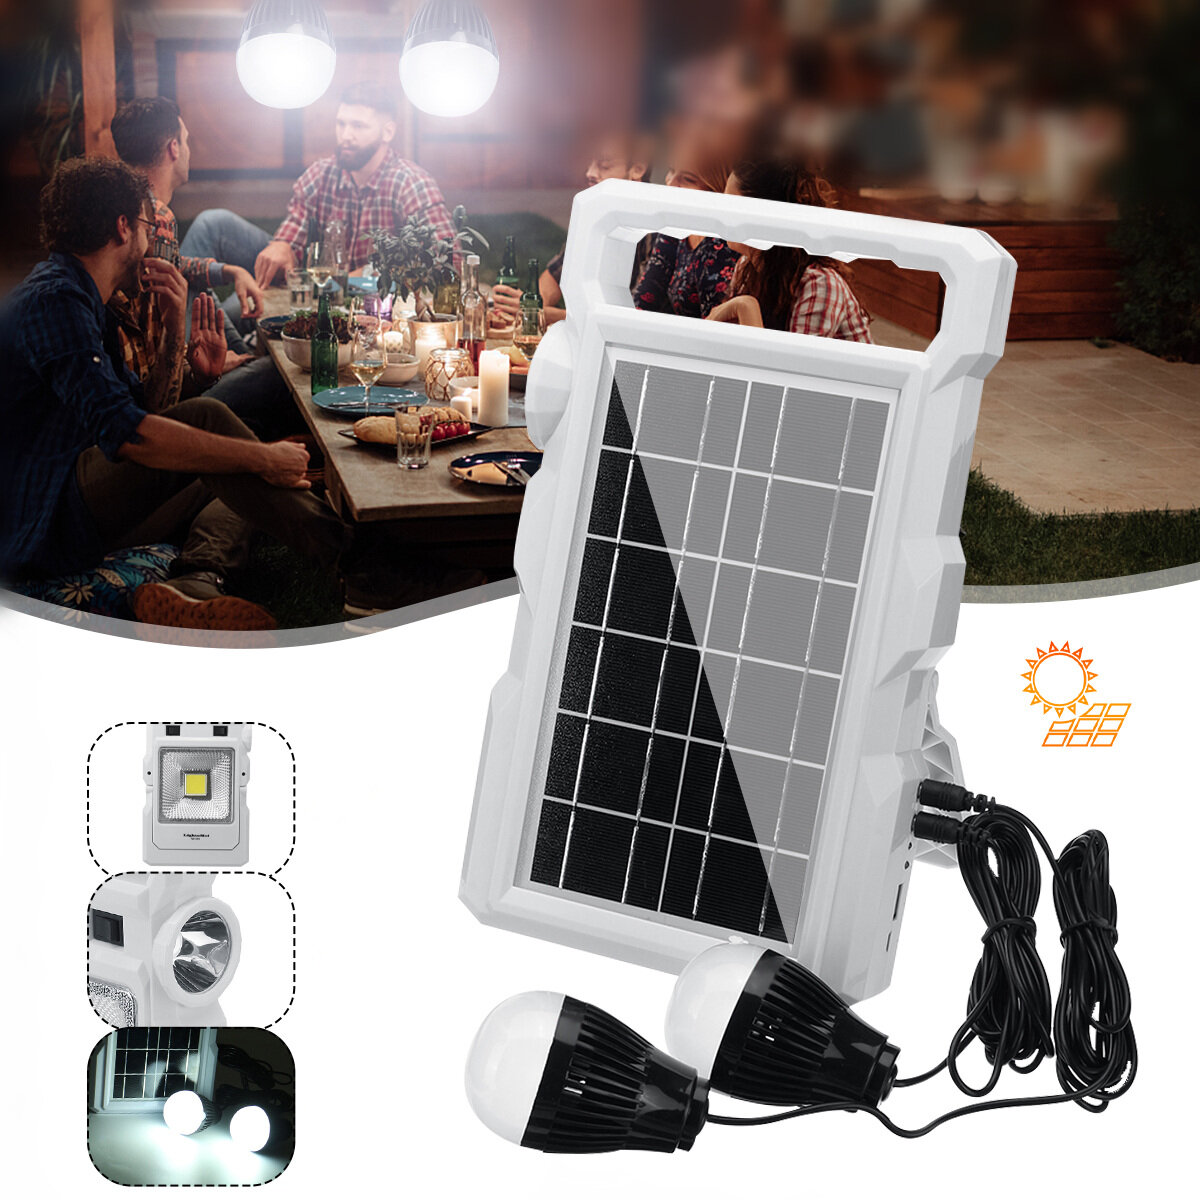 2400mAh Solar Panel Work Light Rechargeable Storage Generator System LED Camping Light Outdoor Fishing Searching Lamp